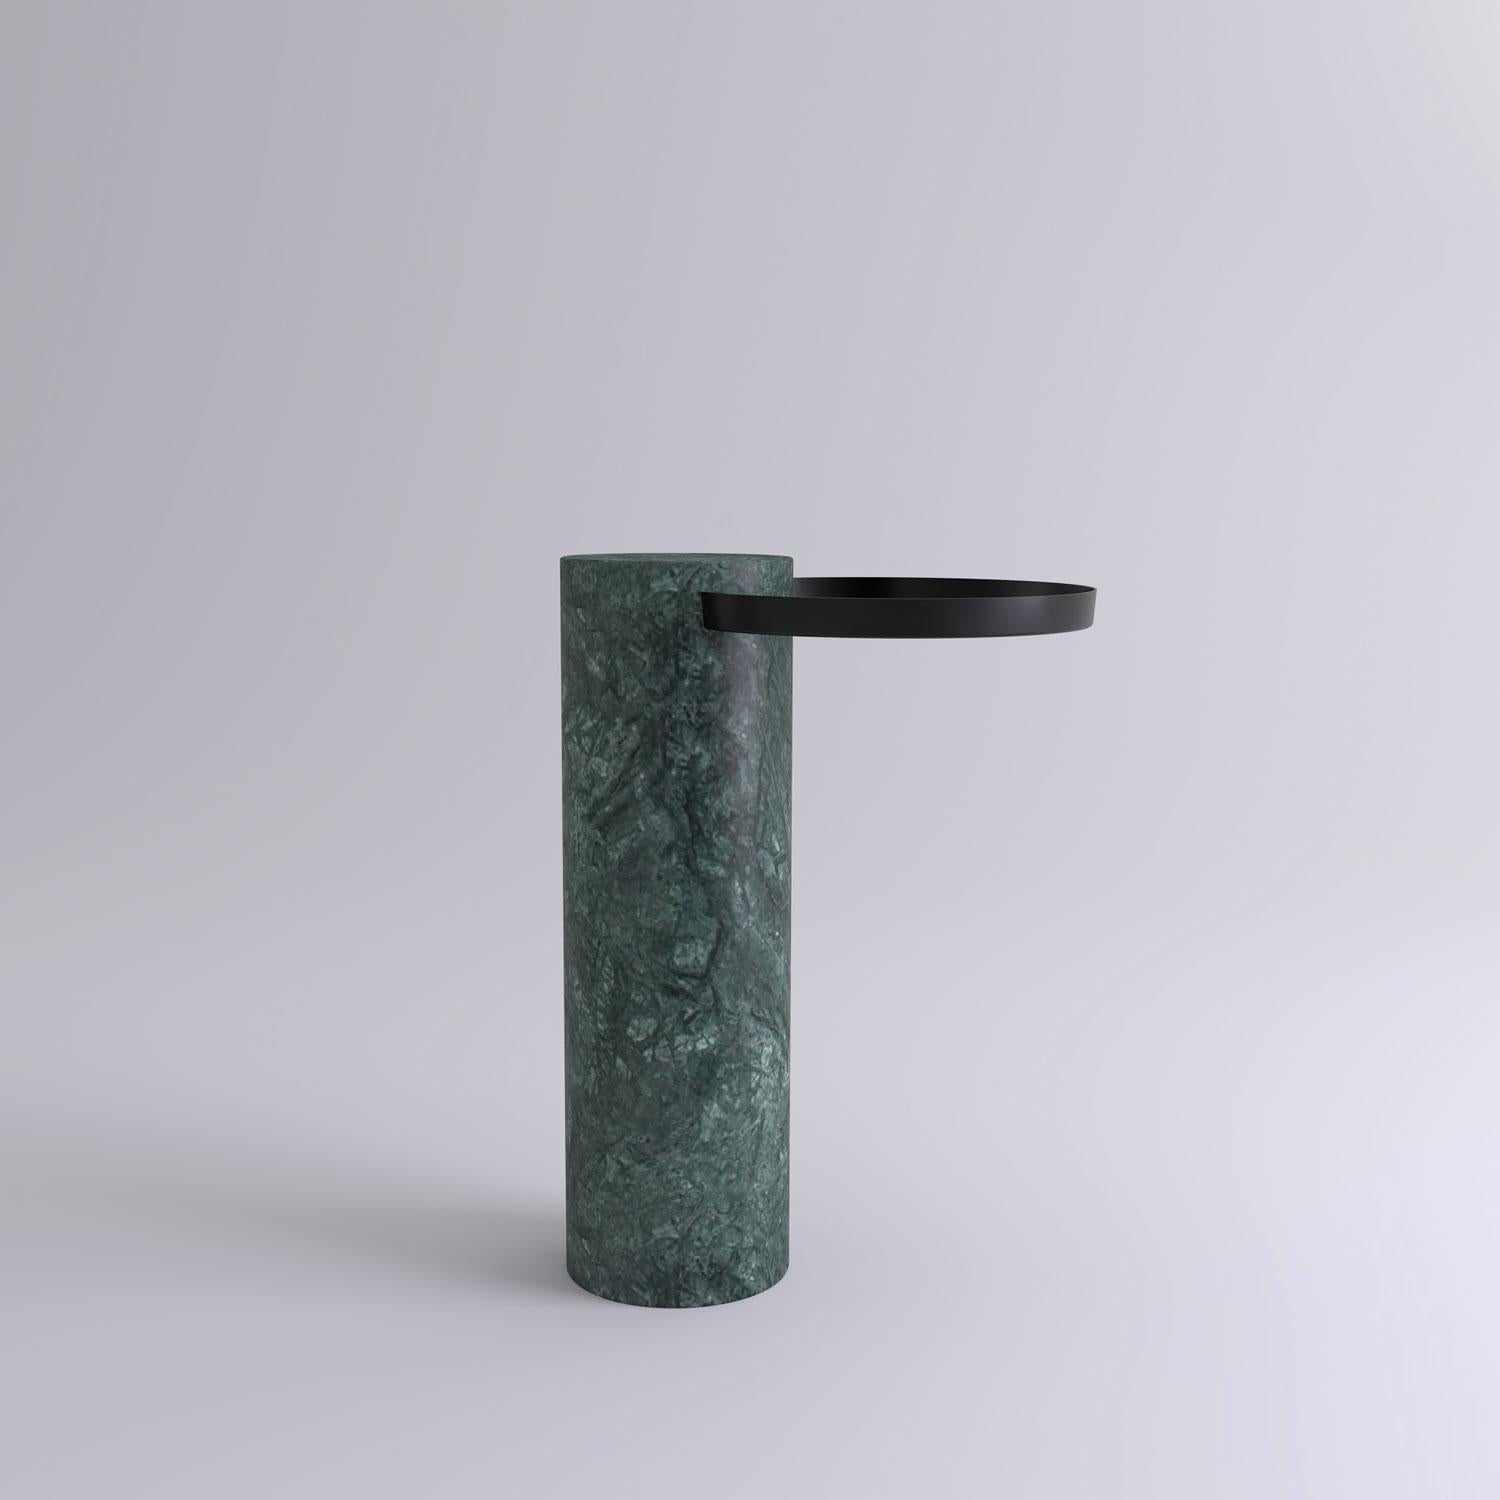 High indian green marble contemporary guéridon, Sebastian Herkner
Dimensions: D 42 x H 57 cm
Materials: Indian Green marble, black metal tray

The salute table exists in 3 sizes, 4 different marble stones for the column and 5 different finishes